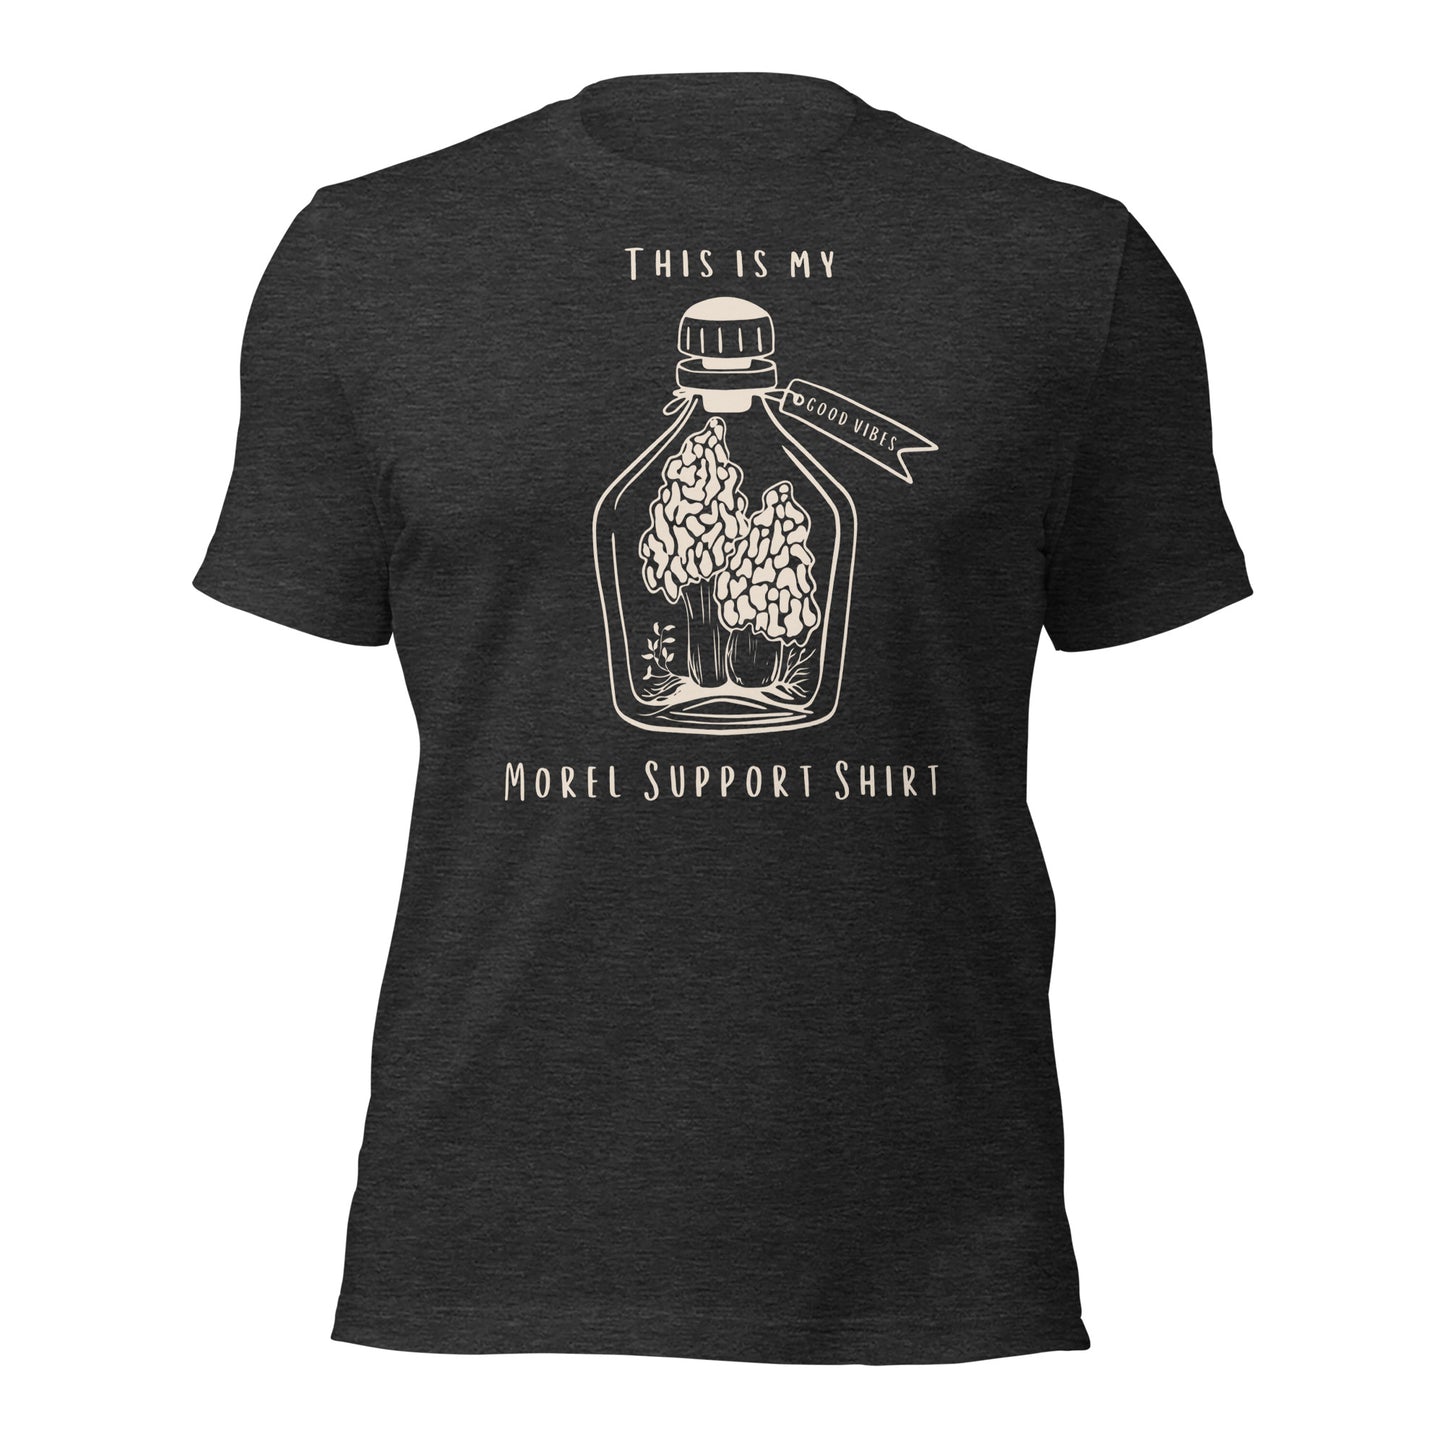 This is My Morel Support Shirt(Dark Colors)